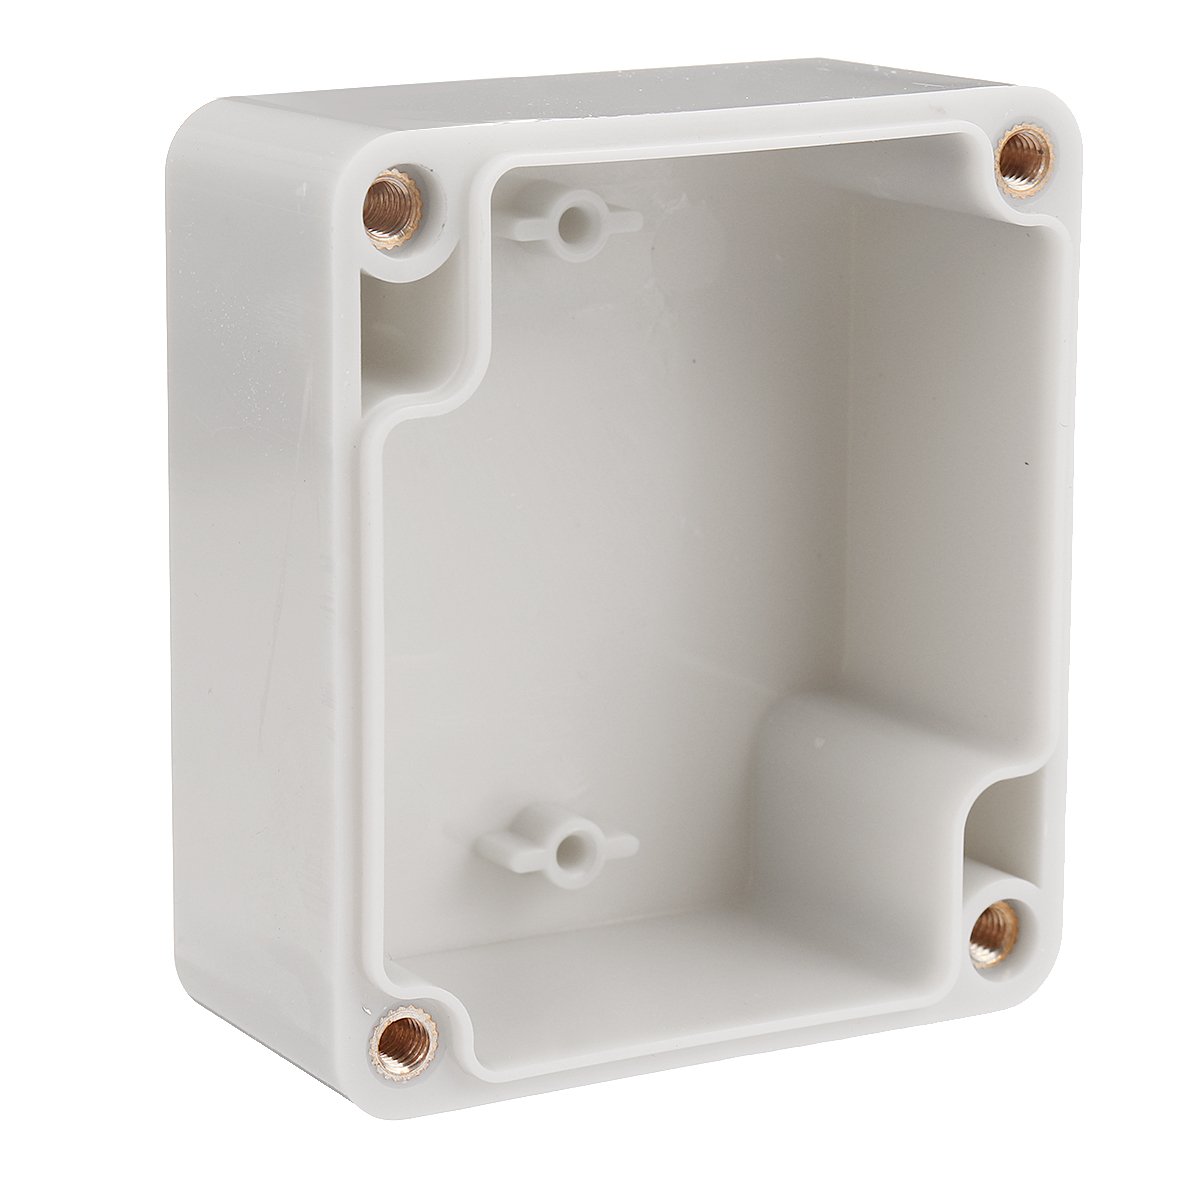 Waterproof-Plastic-Enclosure-Box-Electronic-Project-Case-Electrical-Project-Box-Outdoor-Junction-Box-1678840-9